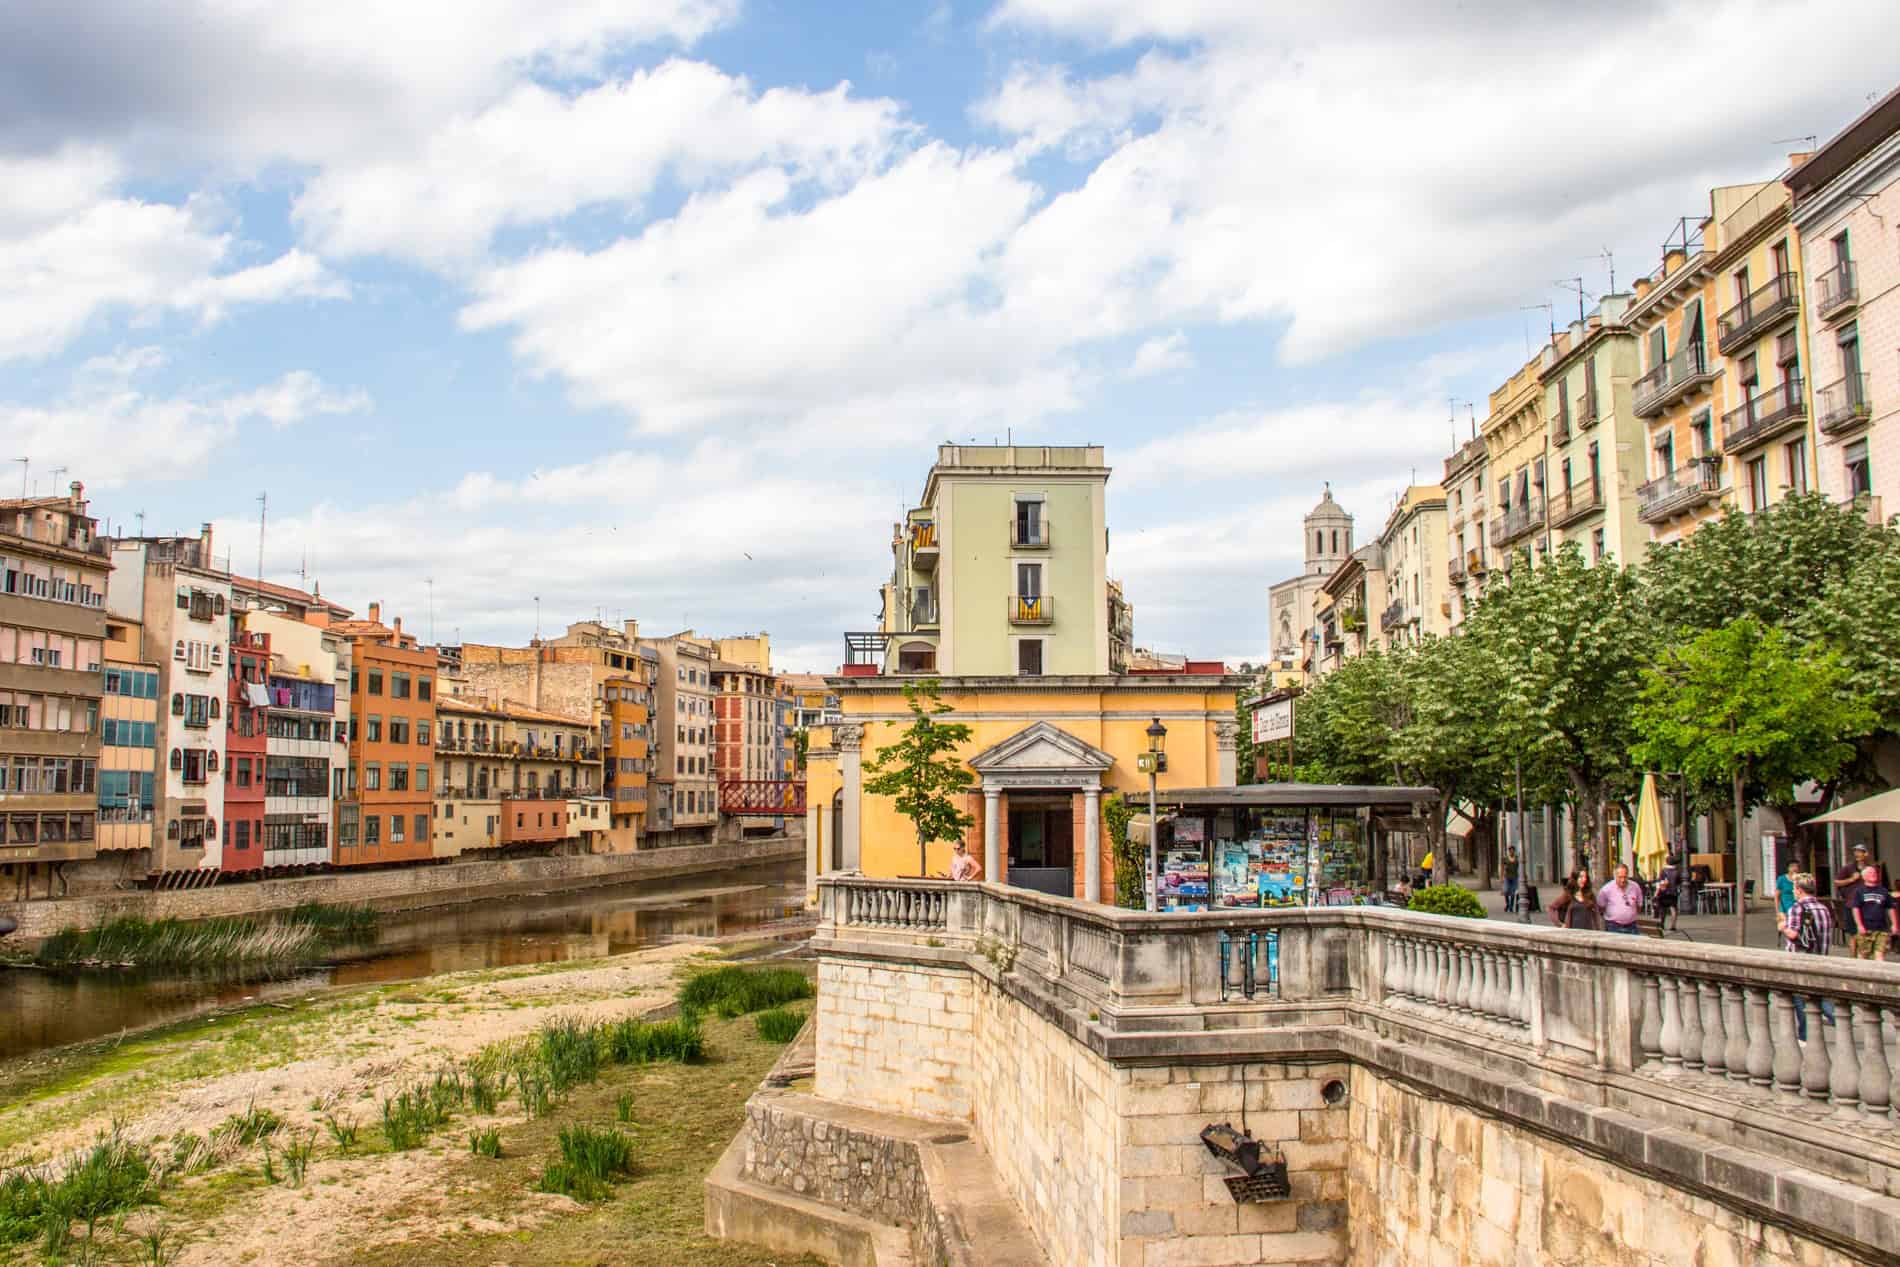 View of the modern structures of riverside Girona, as seen from a bridge. 